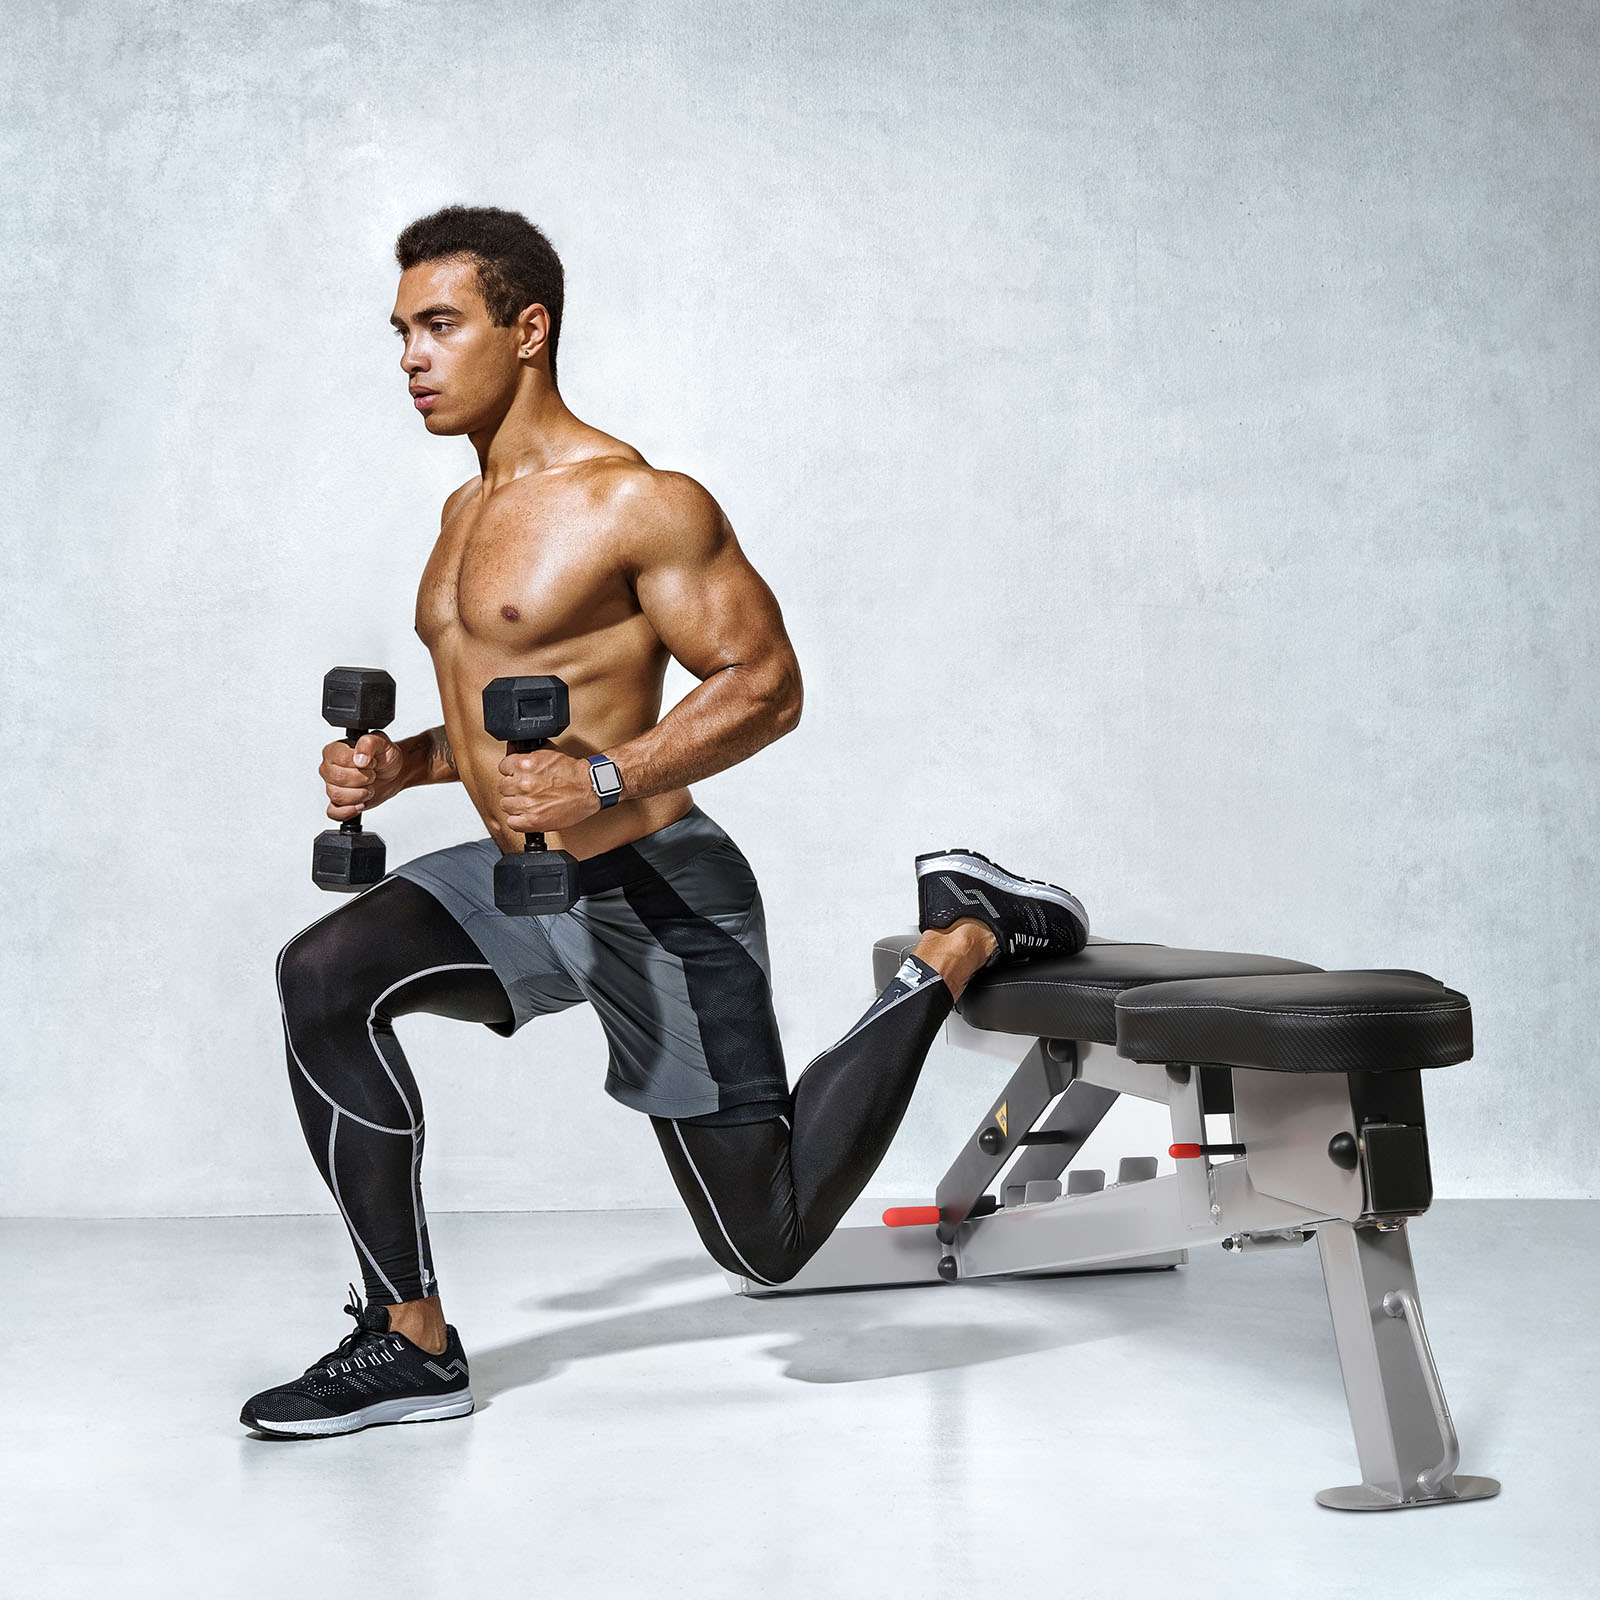 Man Workout with Adjustable Bench and Dumbbell